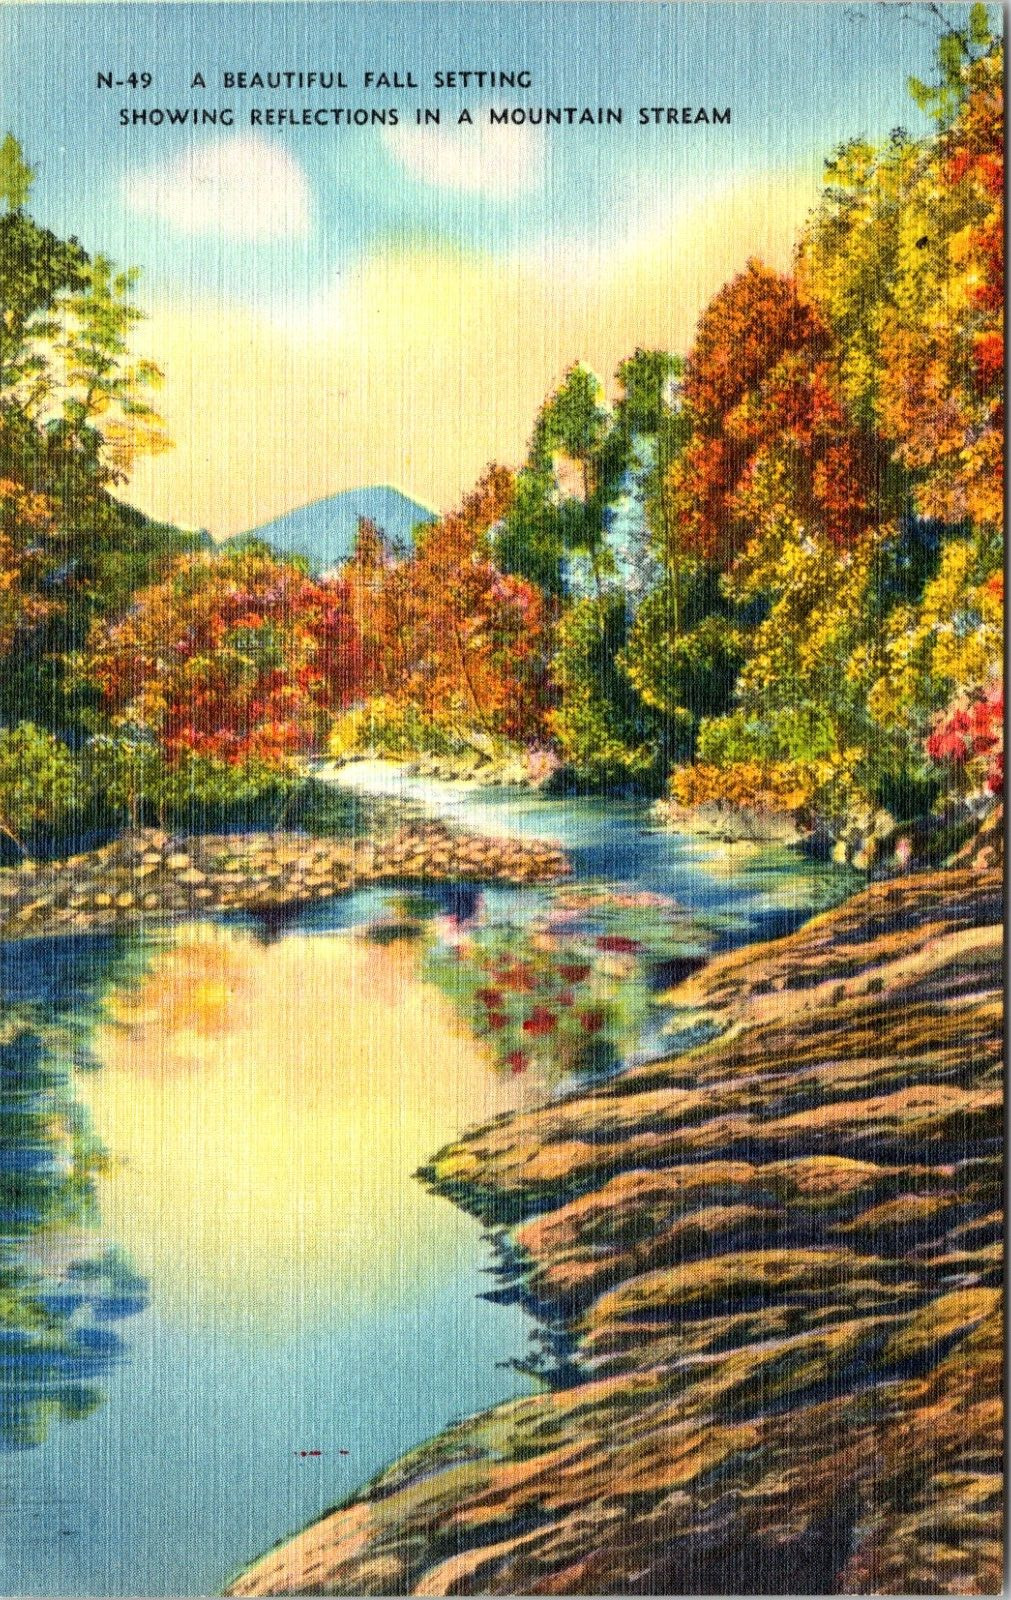 Postcard - A Beautiful Fall Setting Showing Reflections In A Mountain Stream